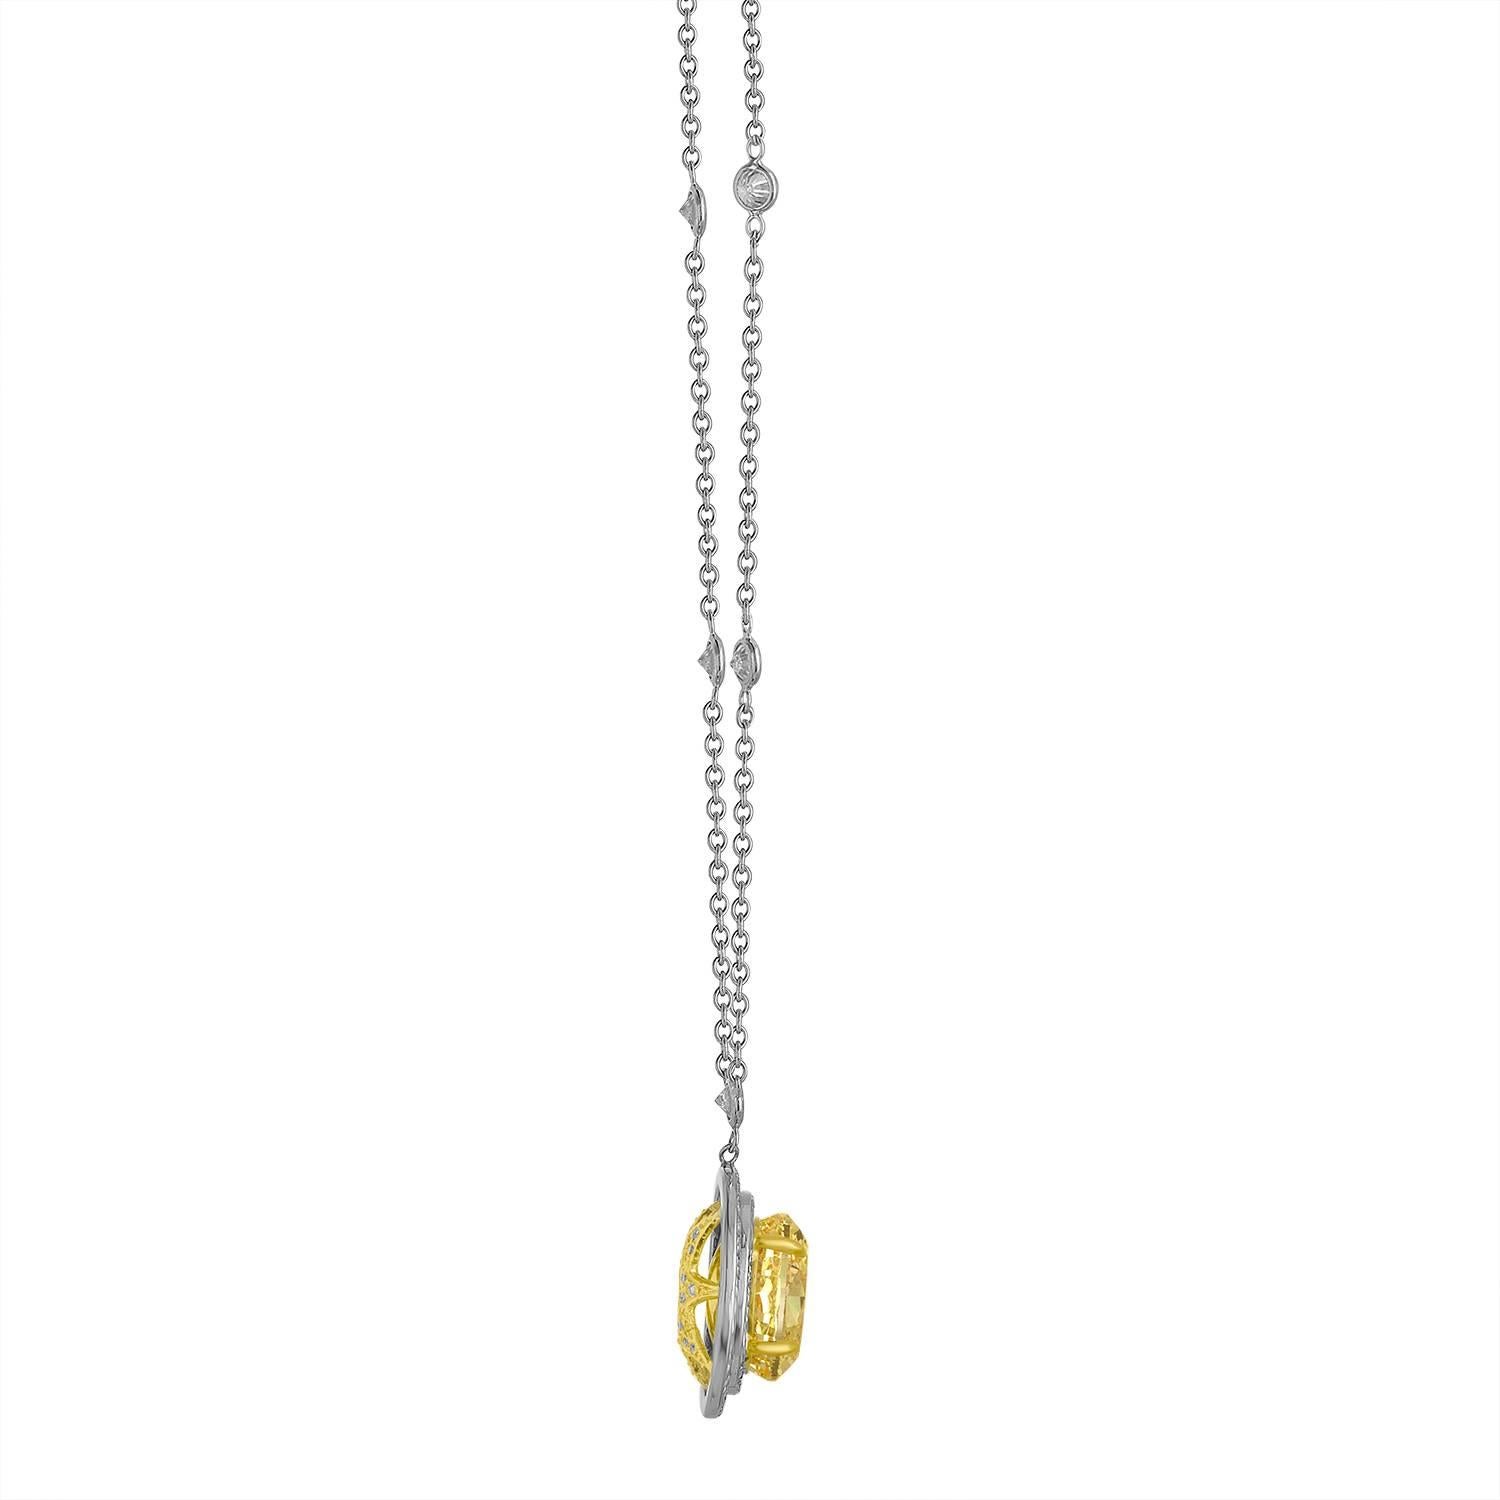 Contemporary 6.41 Carat GIA Certified Fancy Yellow Diamond Gold Necklace For Sale